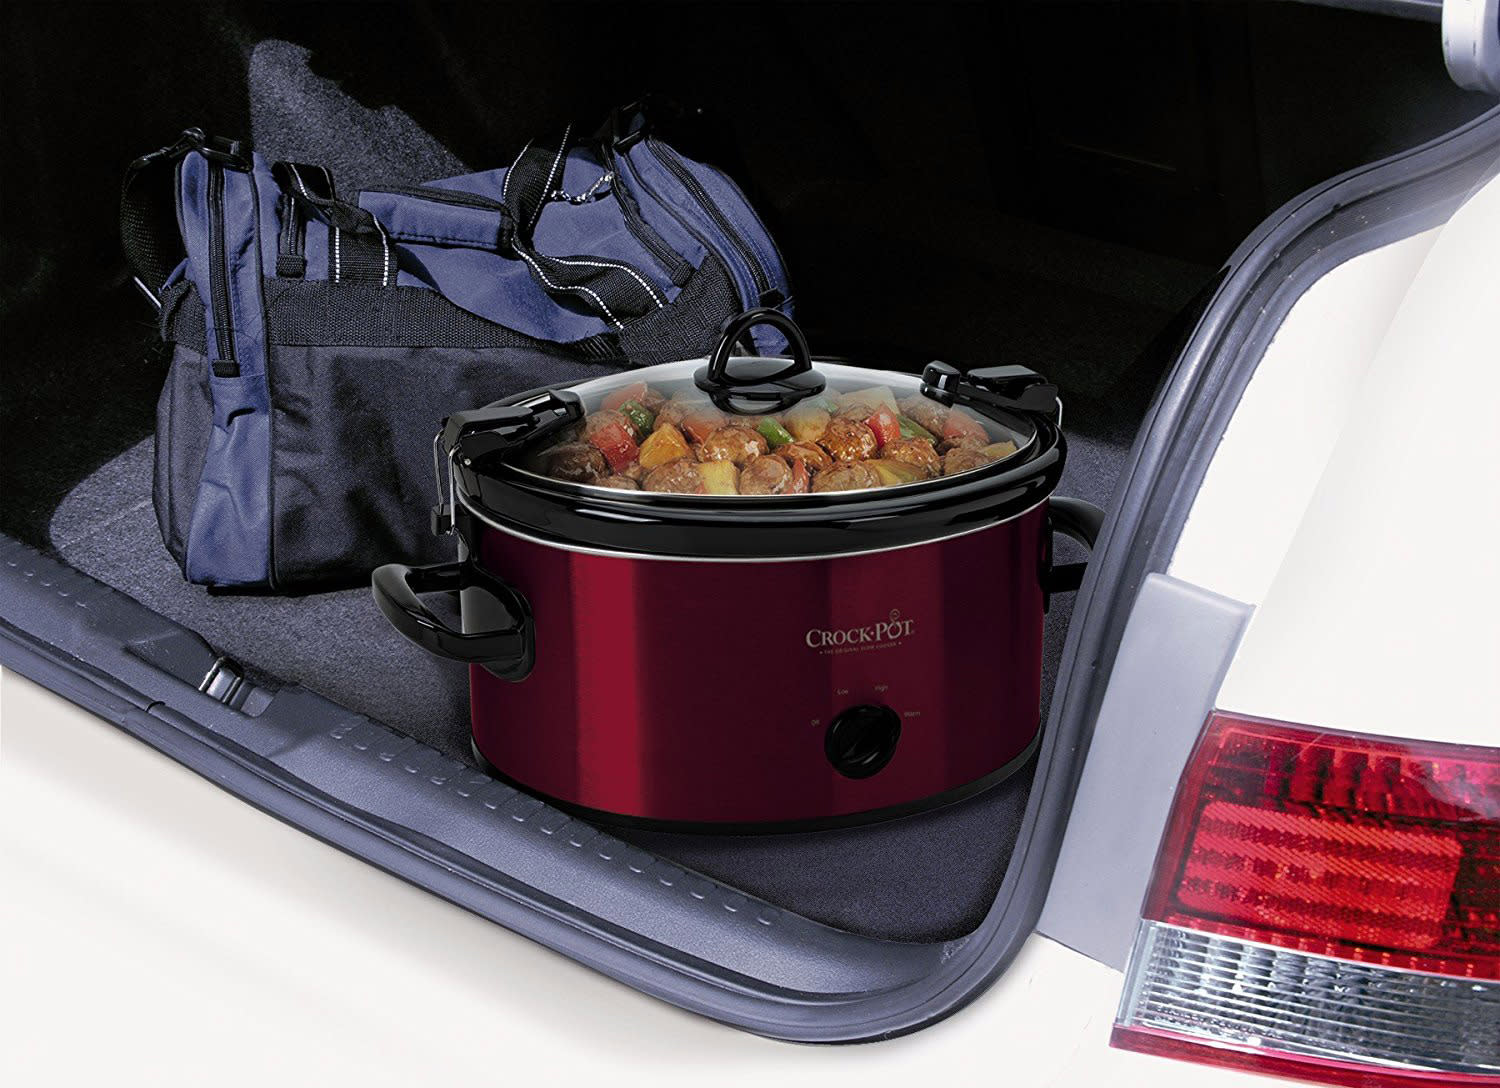  Amazon  has 5 different Crock Pot  cookers  on sale for Prime 